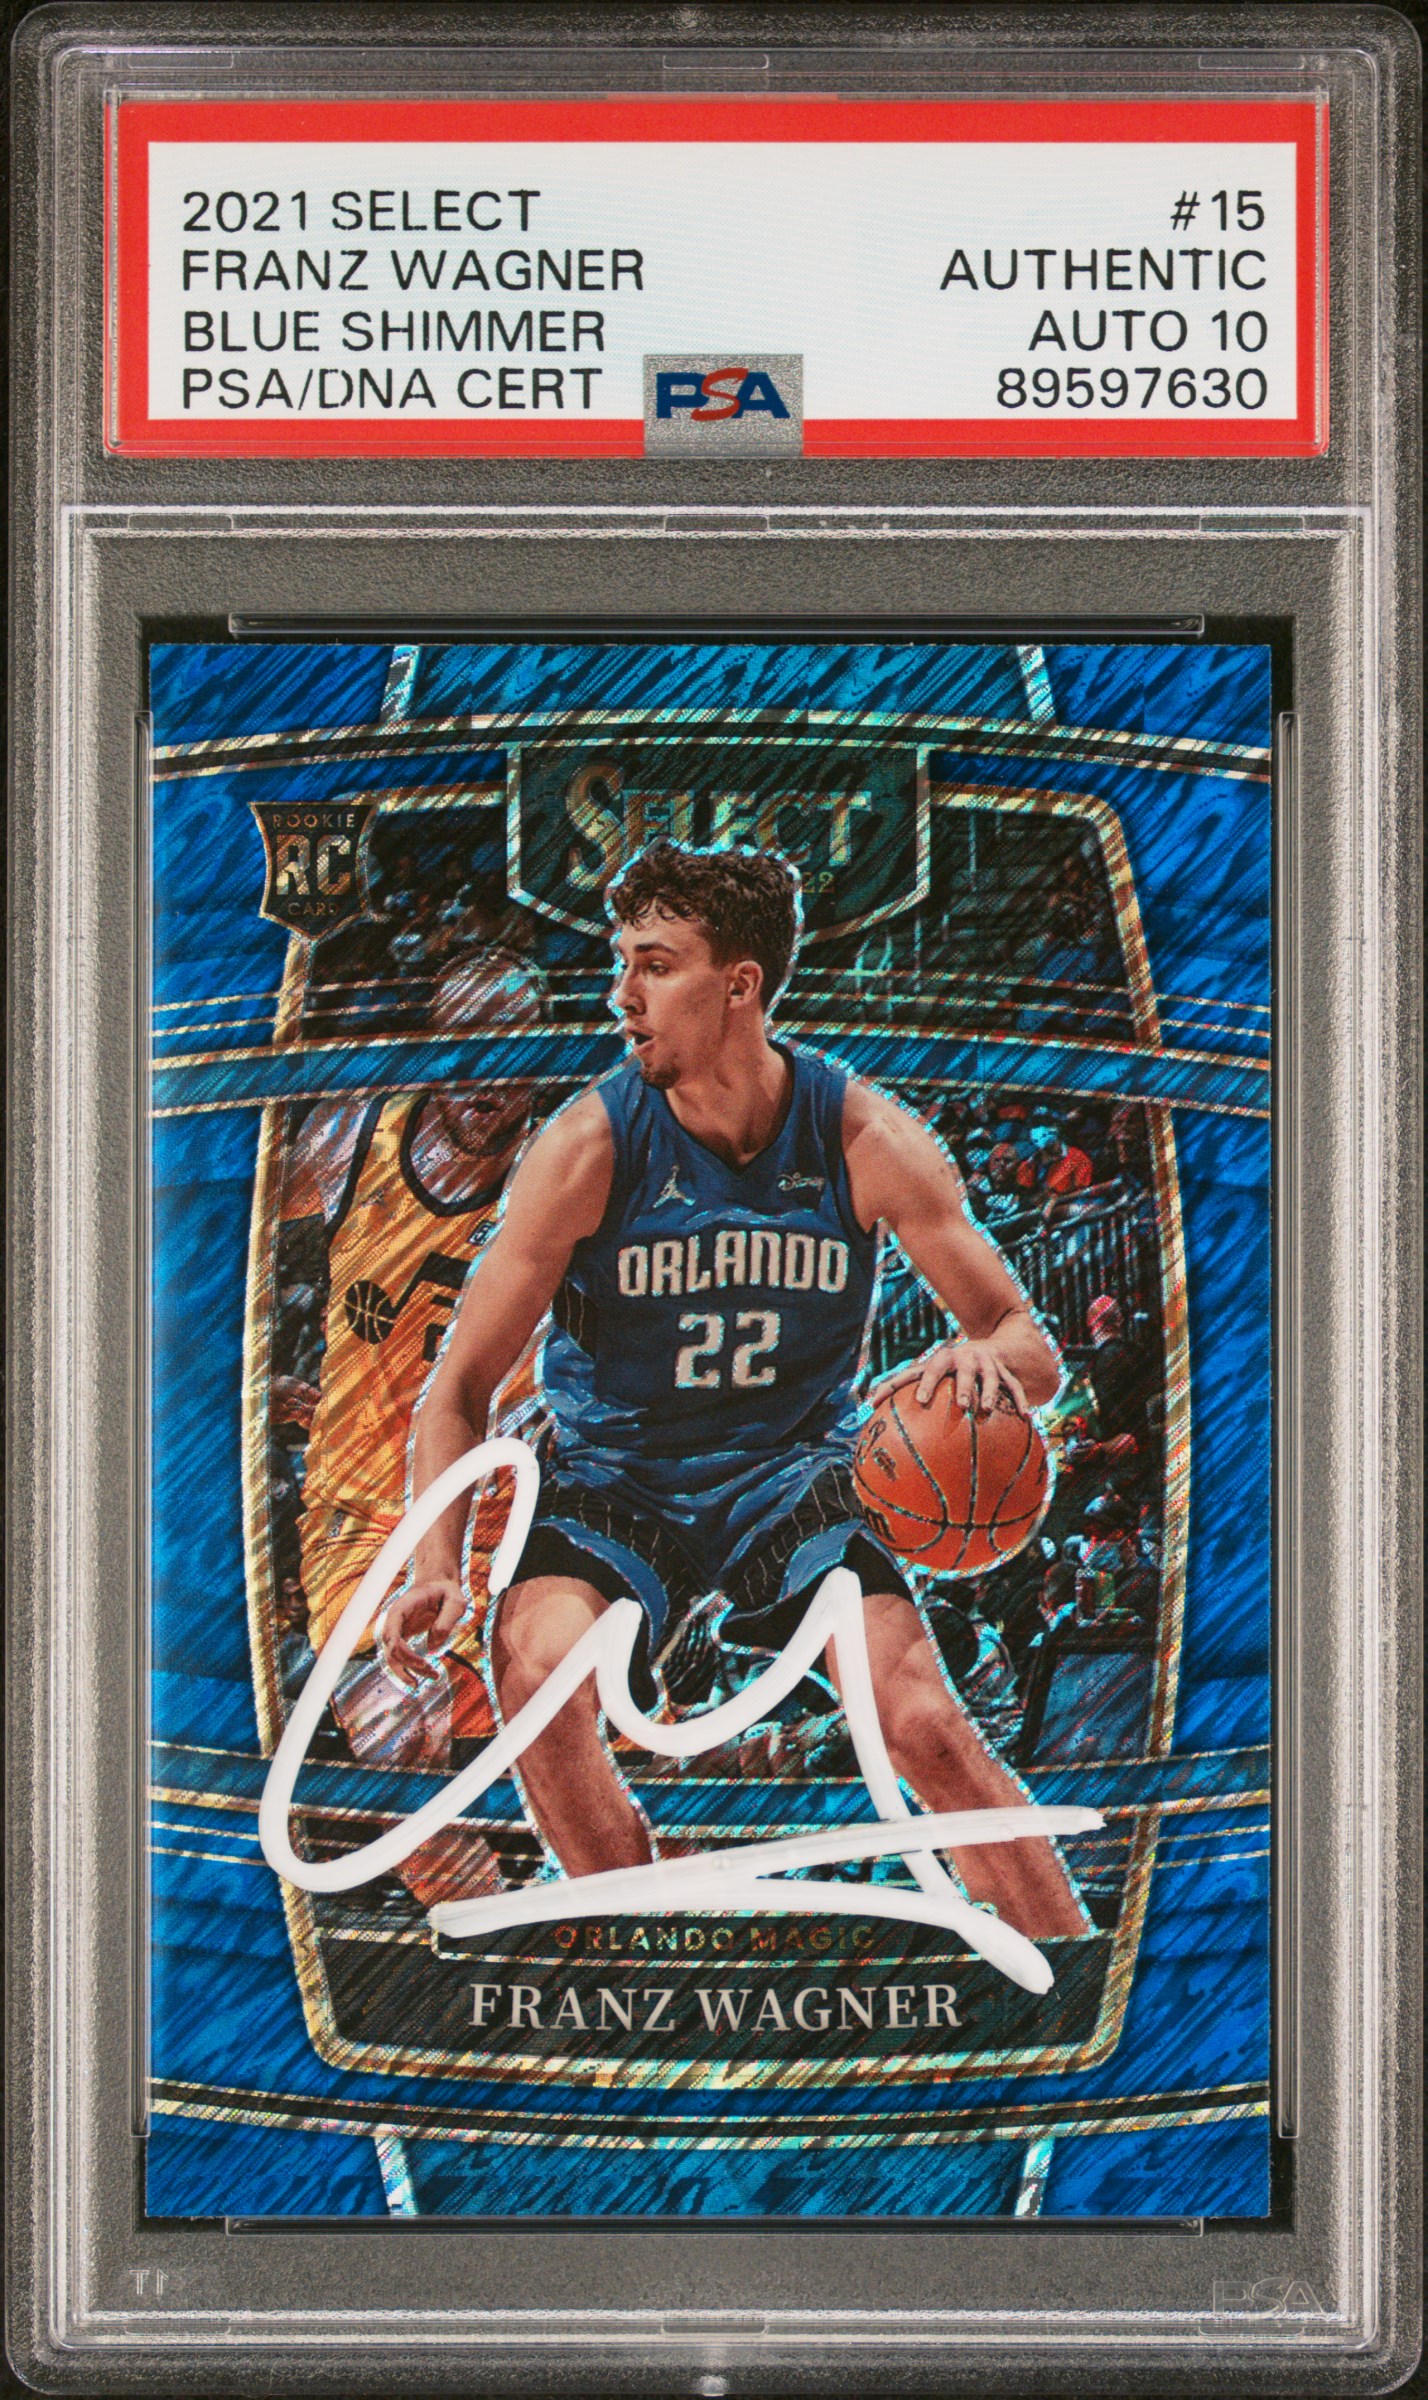 Franz Wagner 2021 Select Blue Shimmer Signed Rookie Card #15 Auto PSA 10 9597630